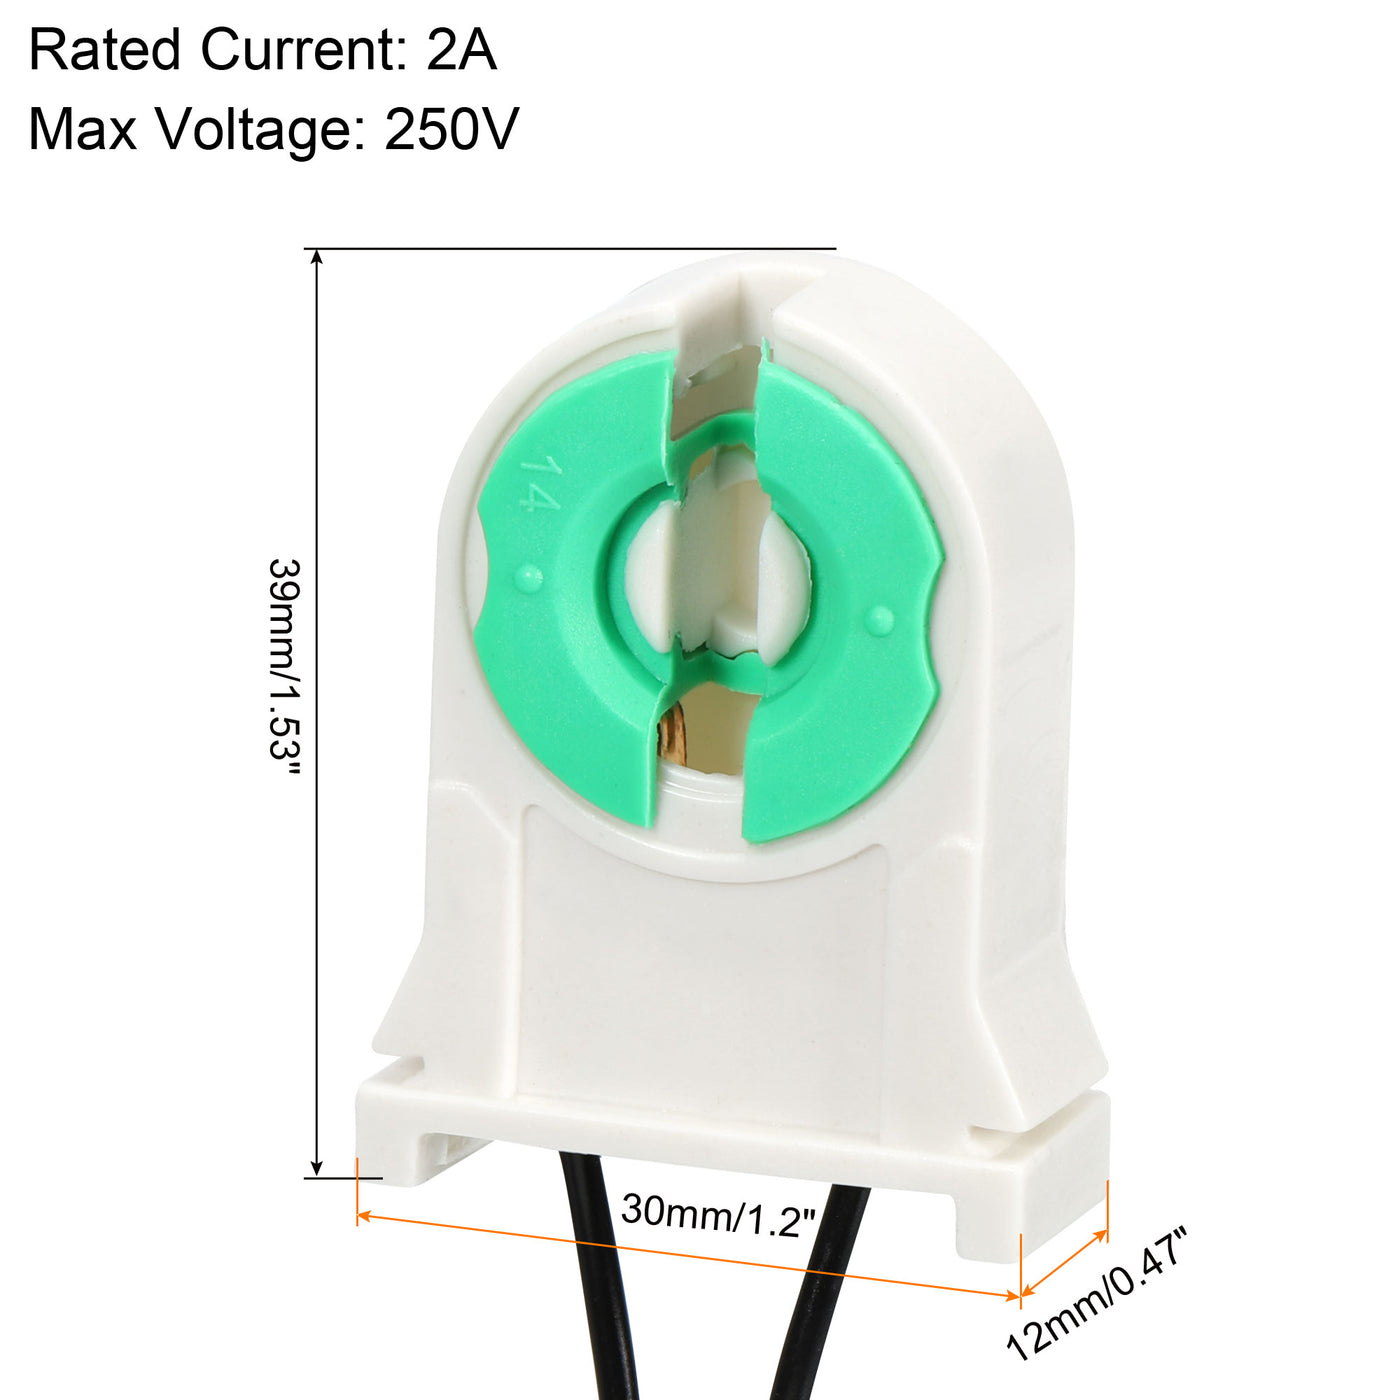 Harfington T8 Lamp Holder Socket Non-Shunted Light Holder with Wire White and Green for LED Fluorescent Tube, Pack of 8